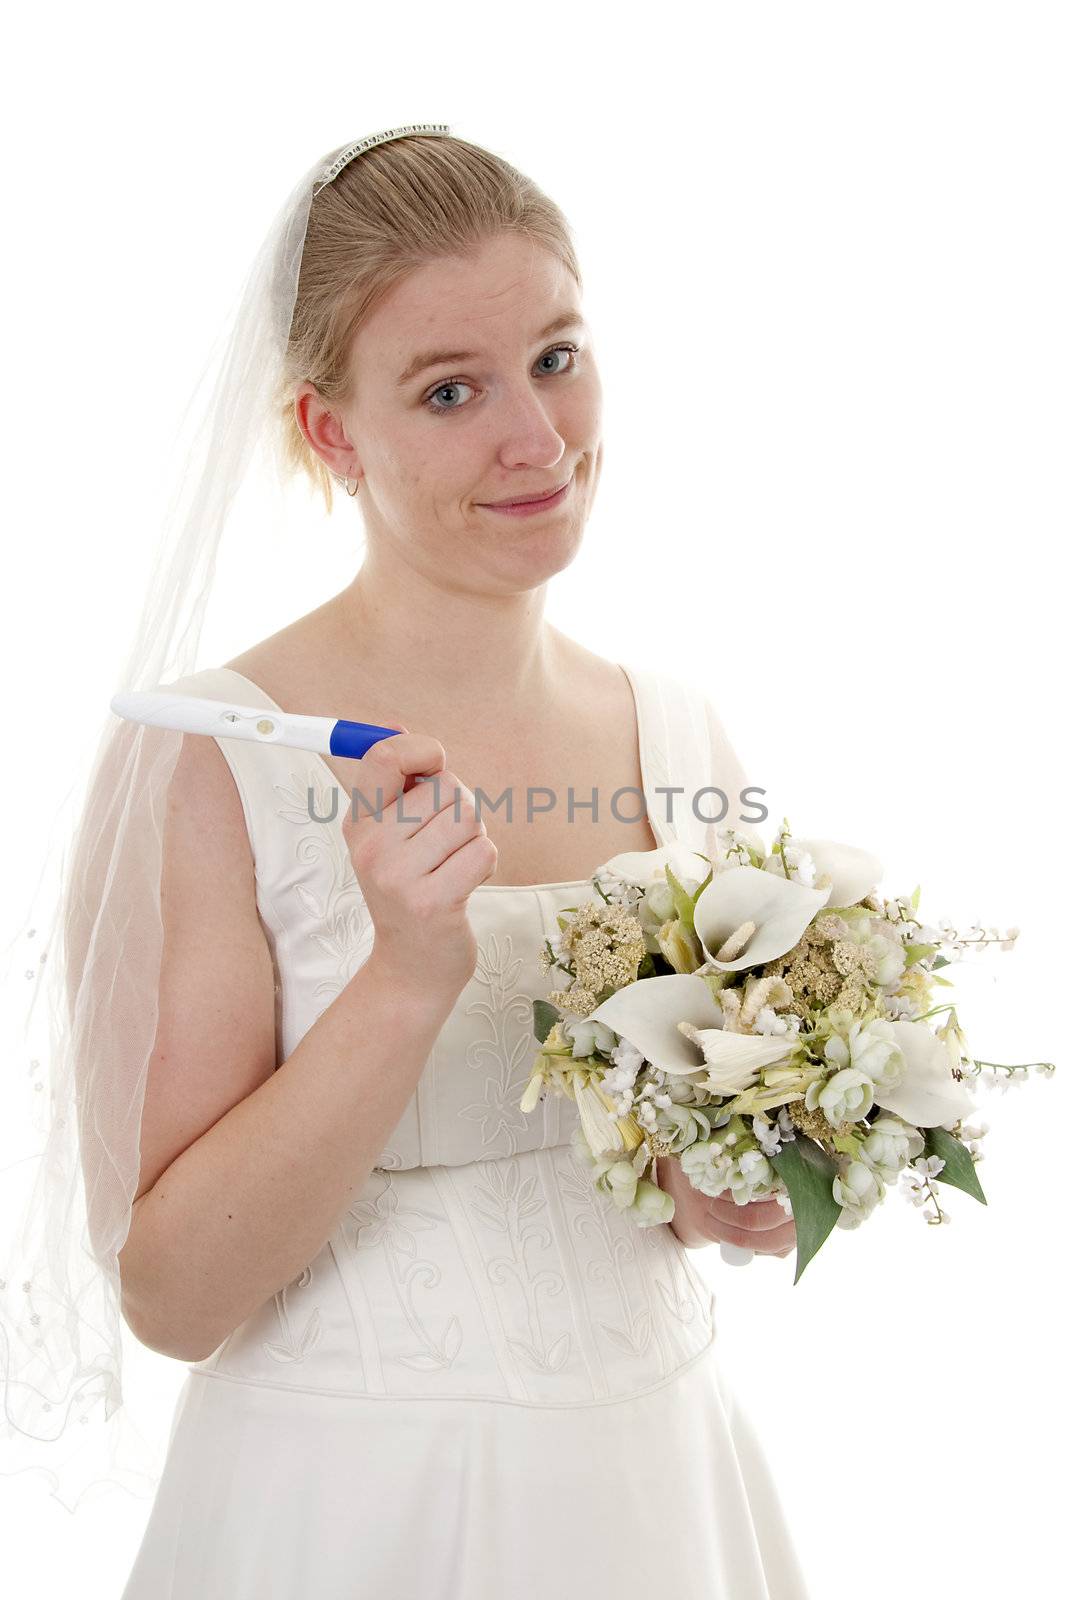 Woman gets married because she is pregnant, over white background